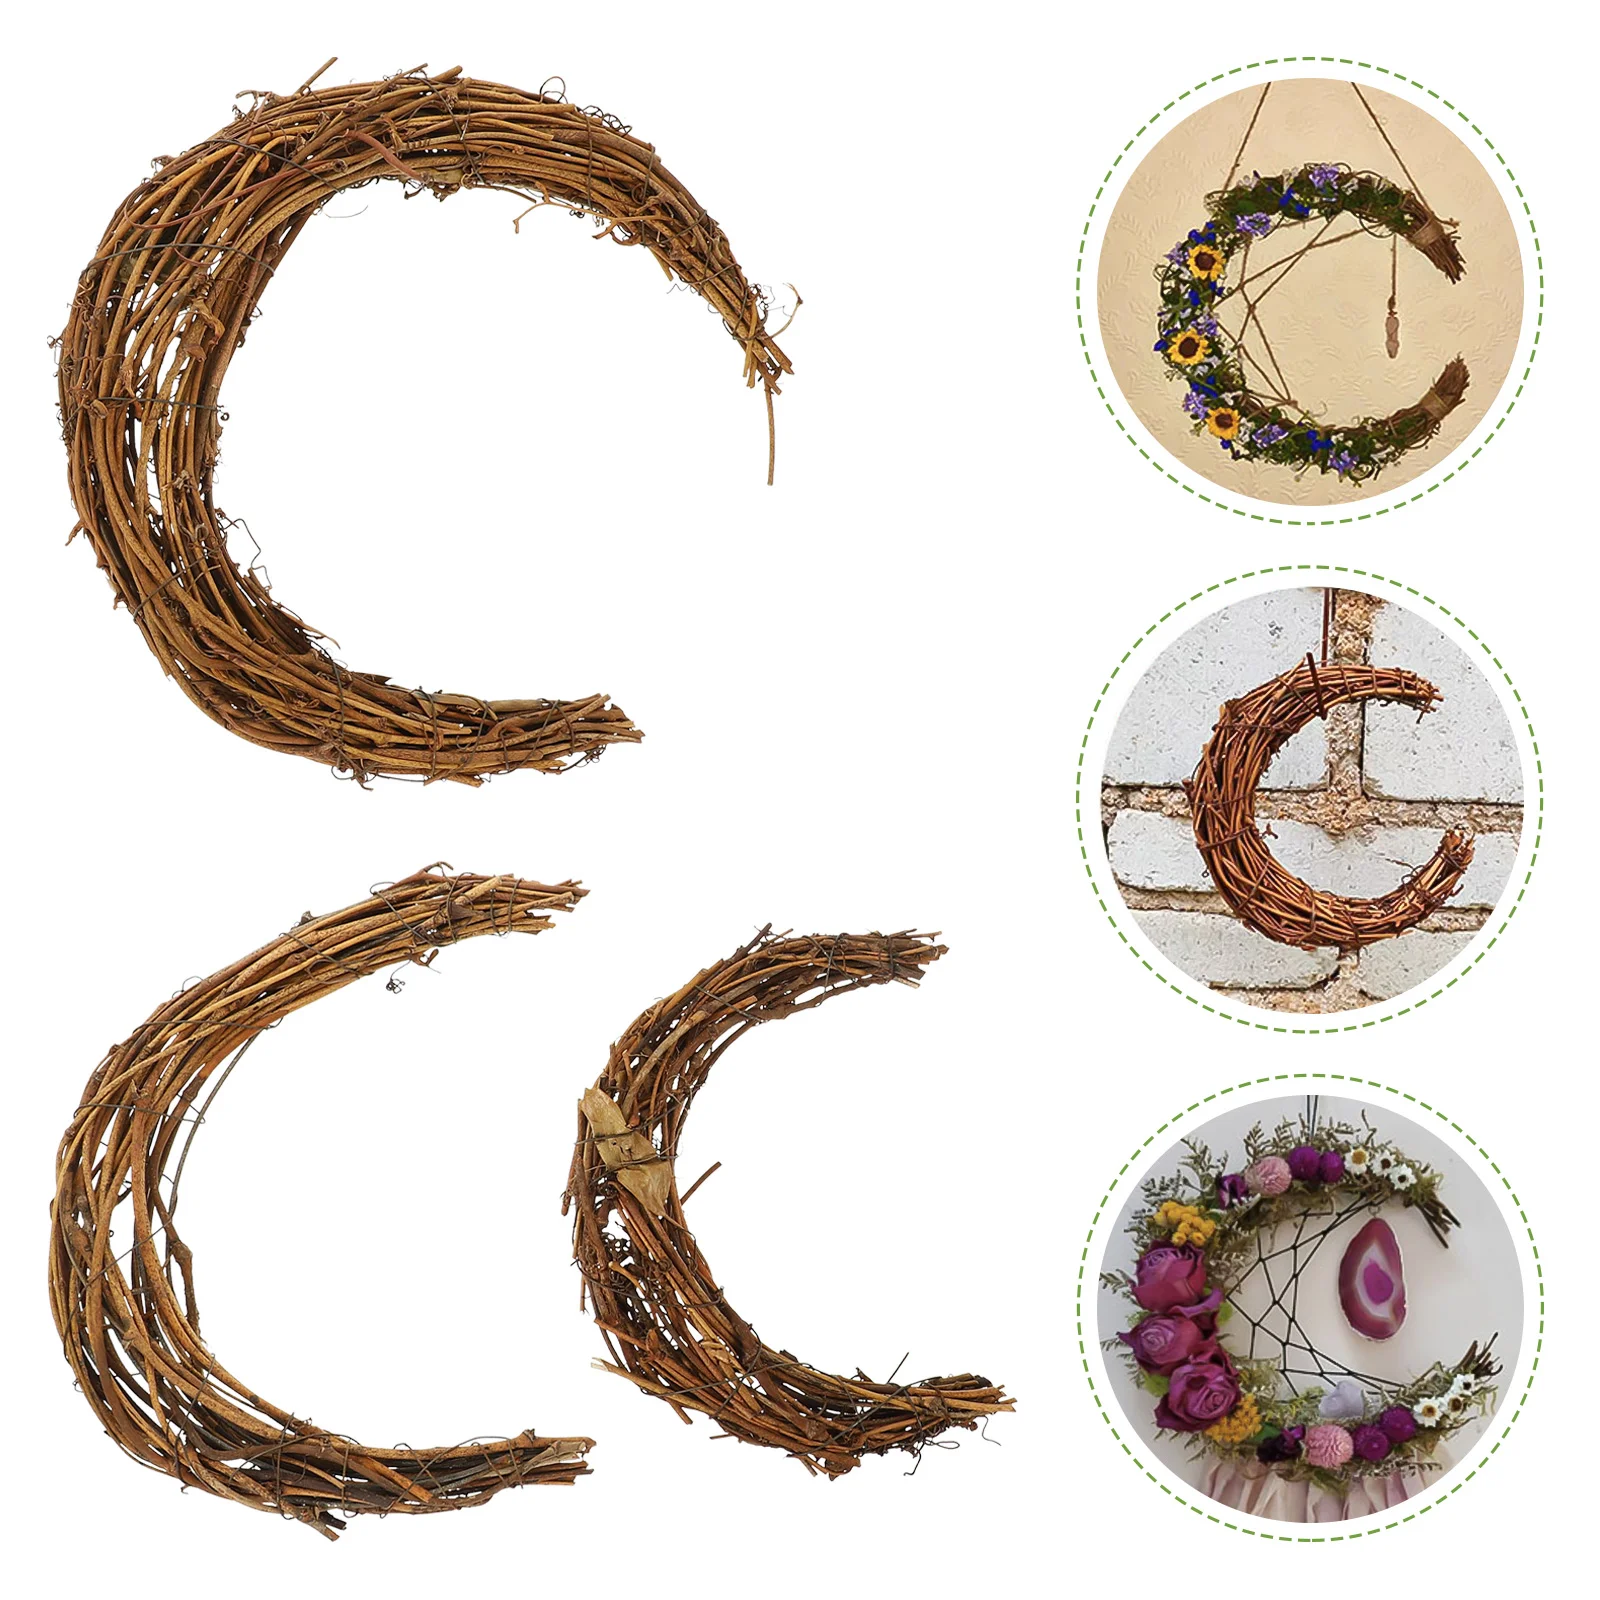 

3 Pcs Smilax Rattan Front Door Wreath DIY Garland Materials Making Rings Accessory Dry Vine Frame Dream Catcher Circle